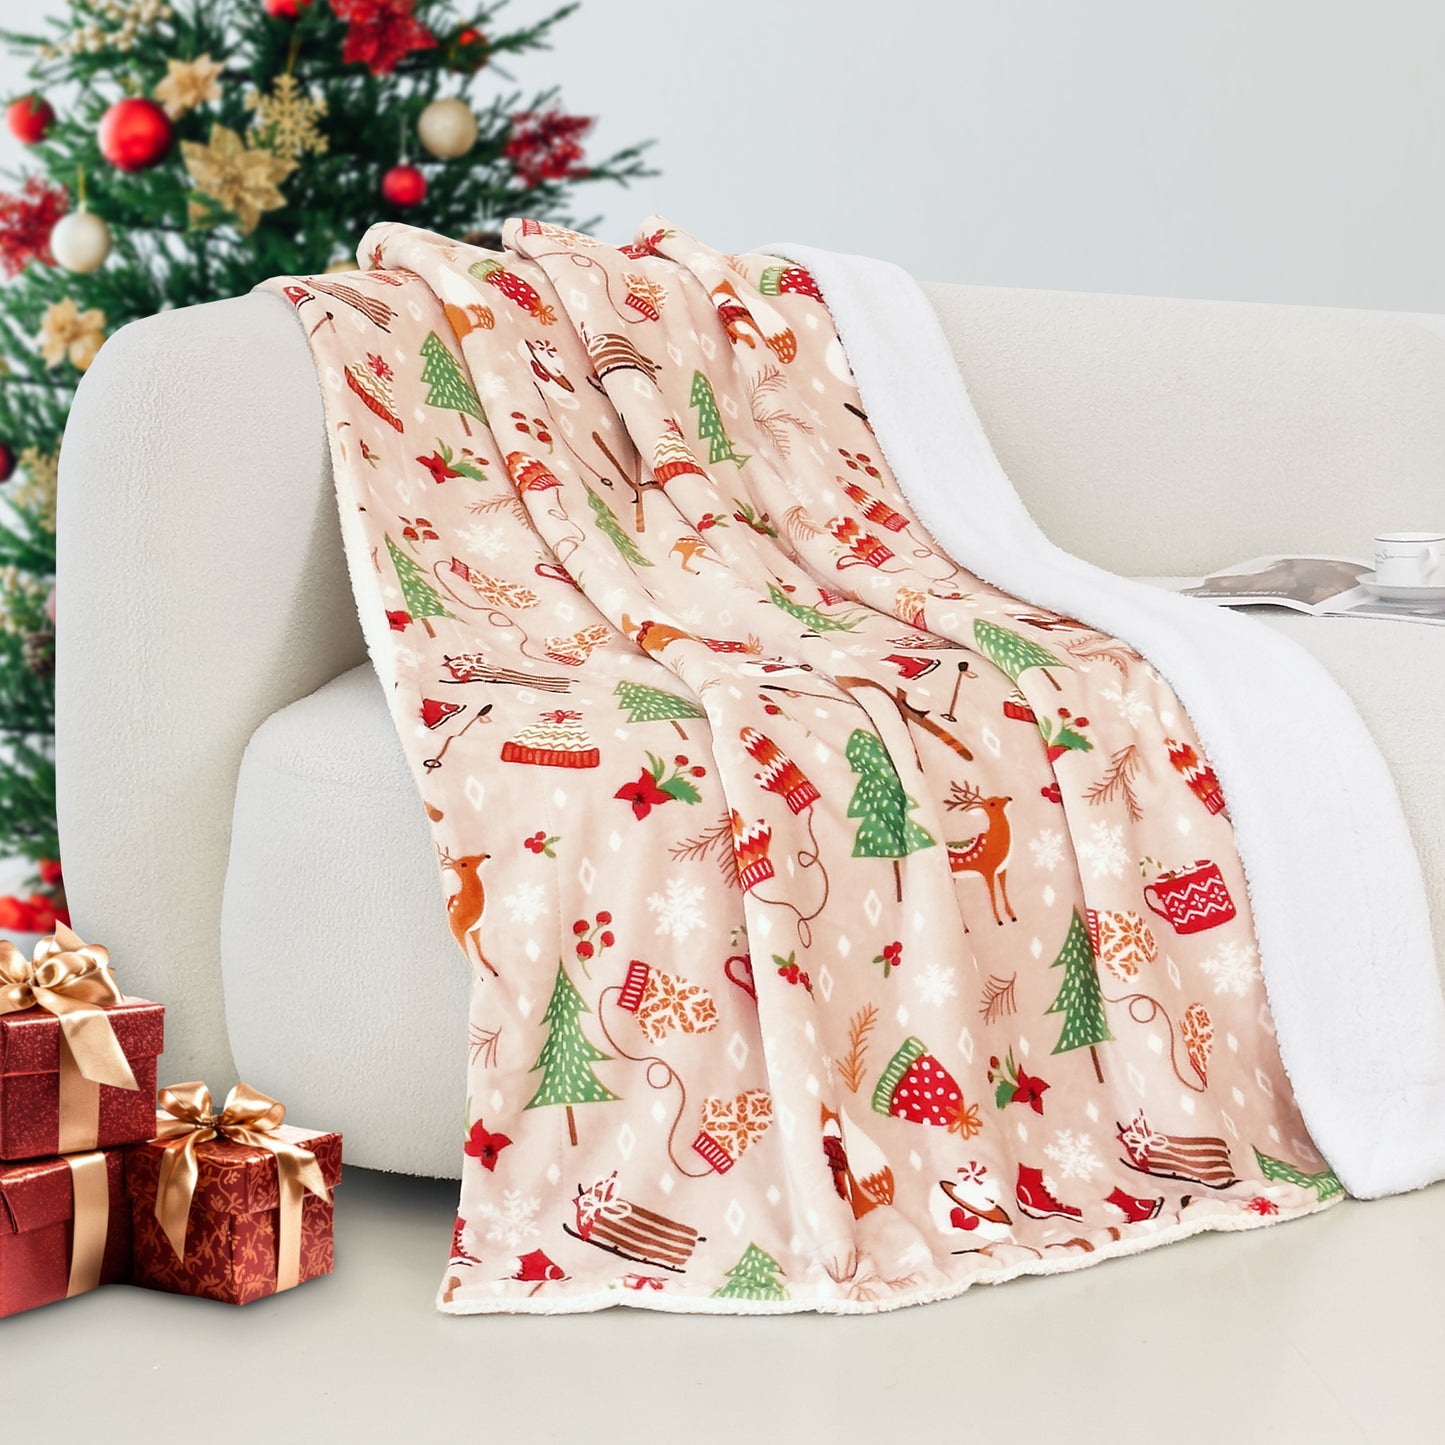 Elegant Comfort Christmas Sherpa Throw with Flannel Fleece - 50 x 60 inches